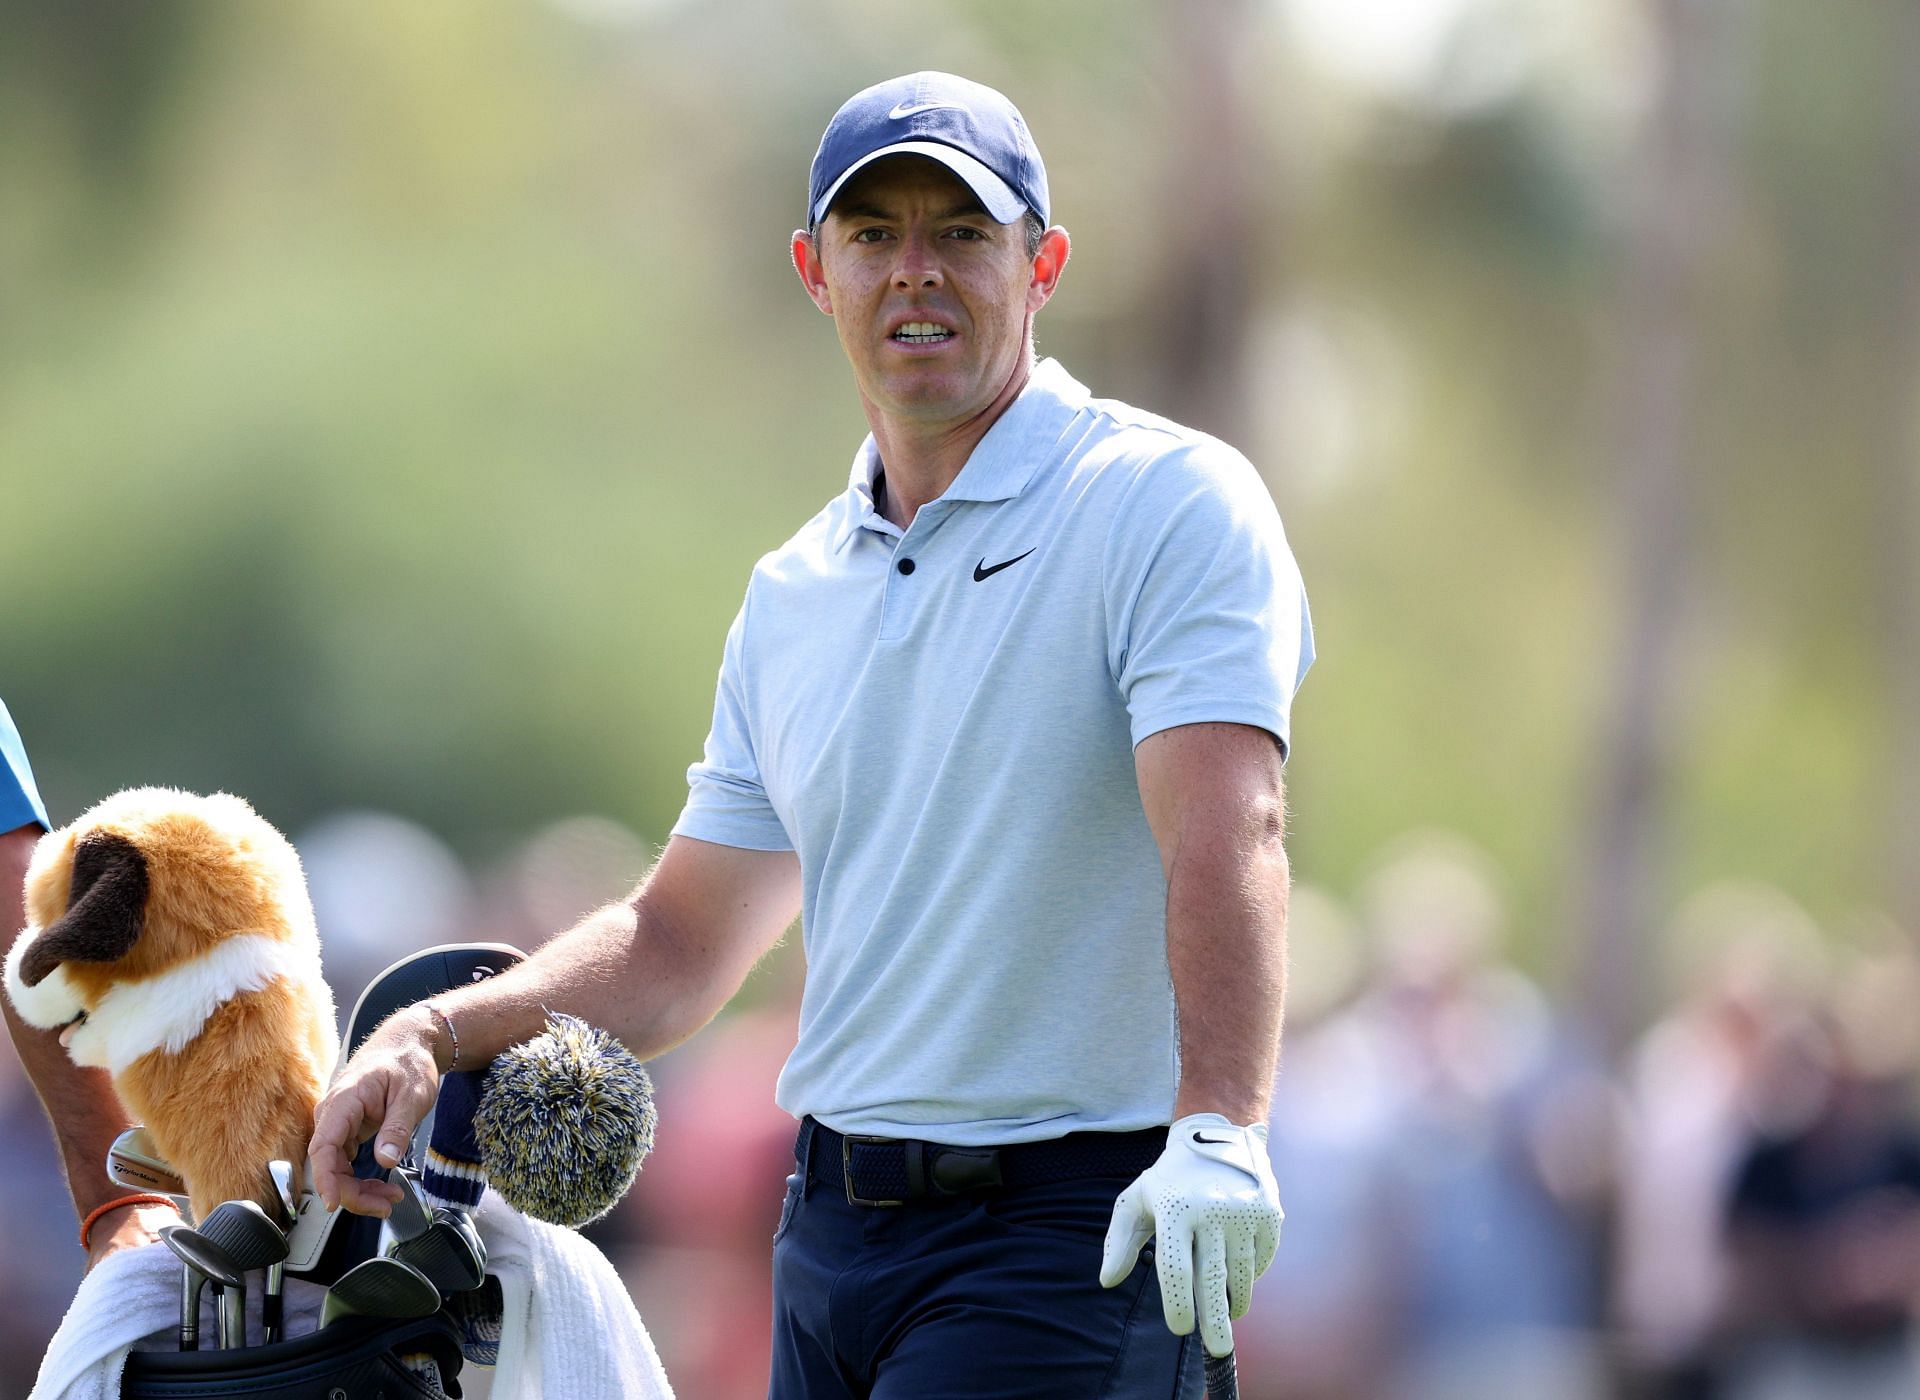 Rory McIlroy is very charitable